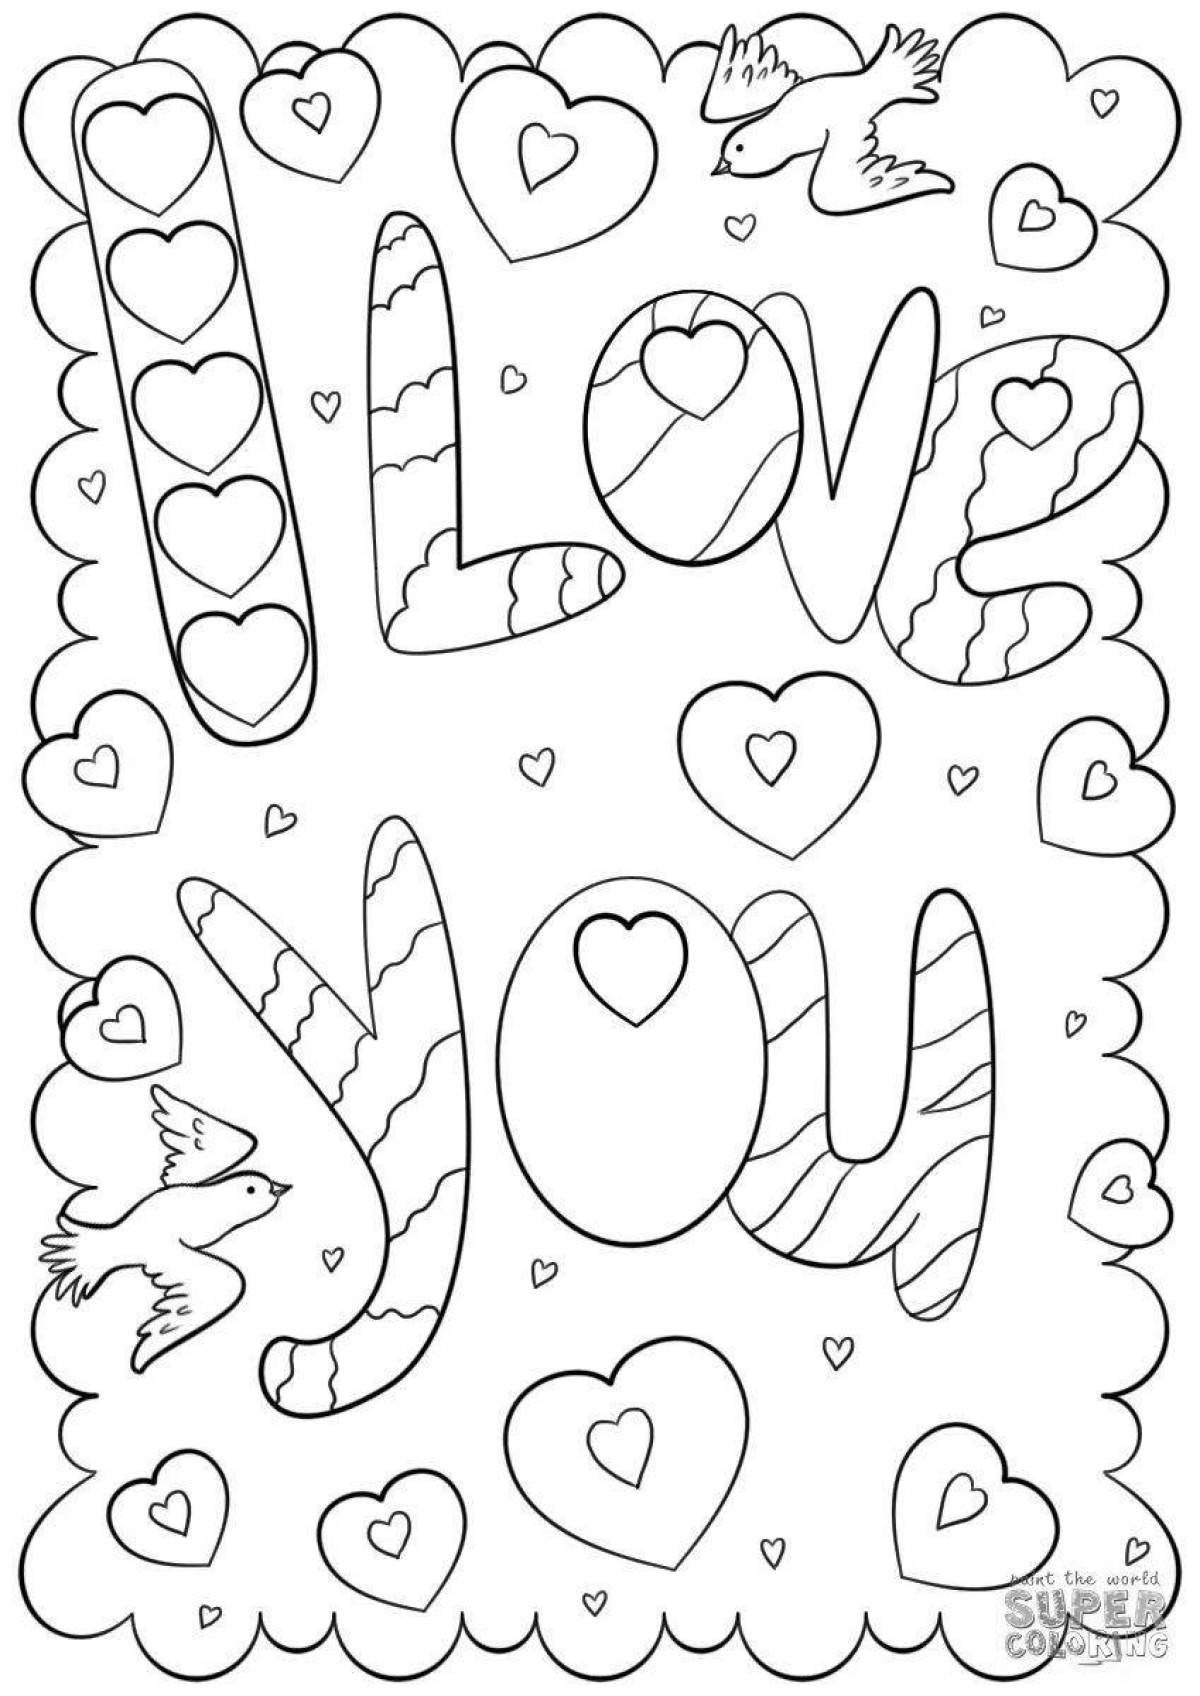 Dreamy i love you coloring book